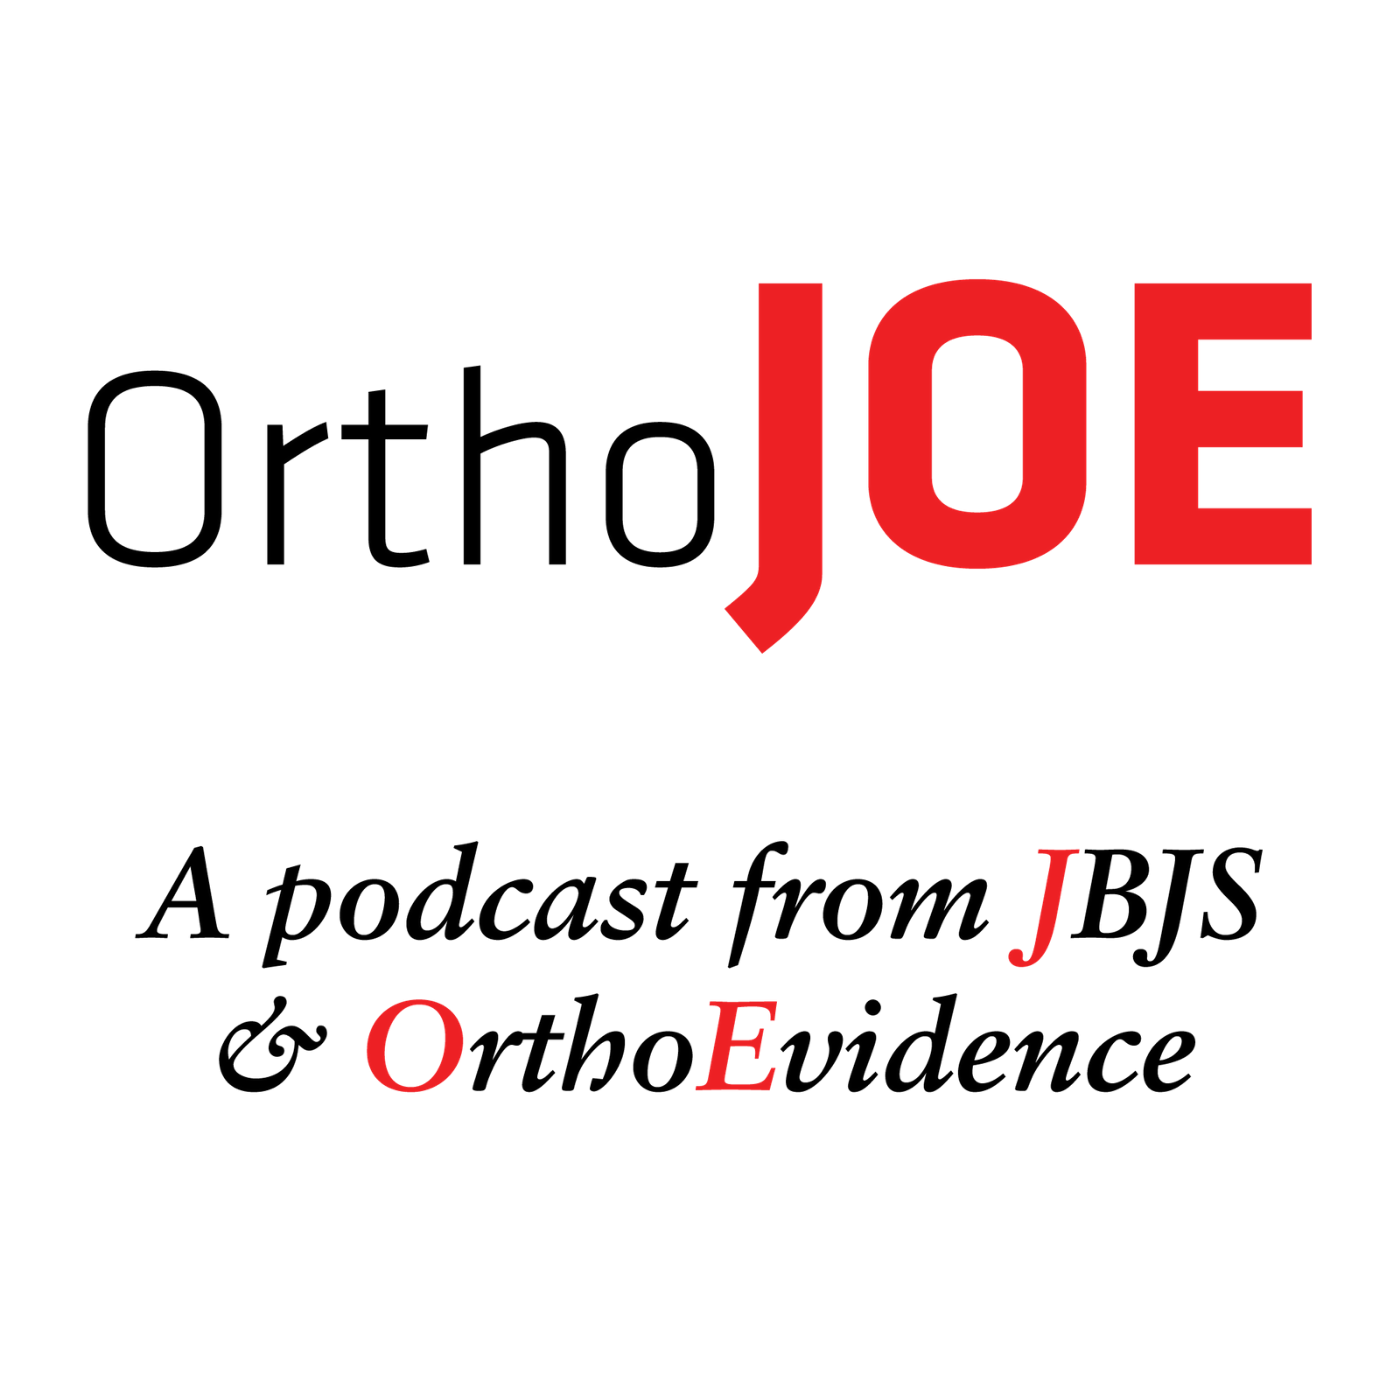 The Orthopaedic Residency Research Year: A Call for Action